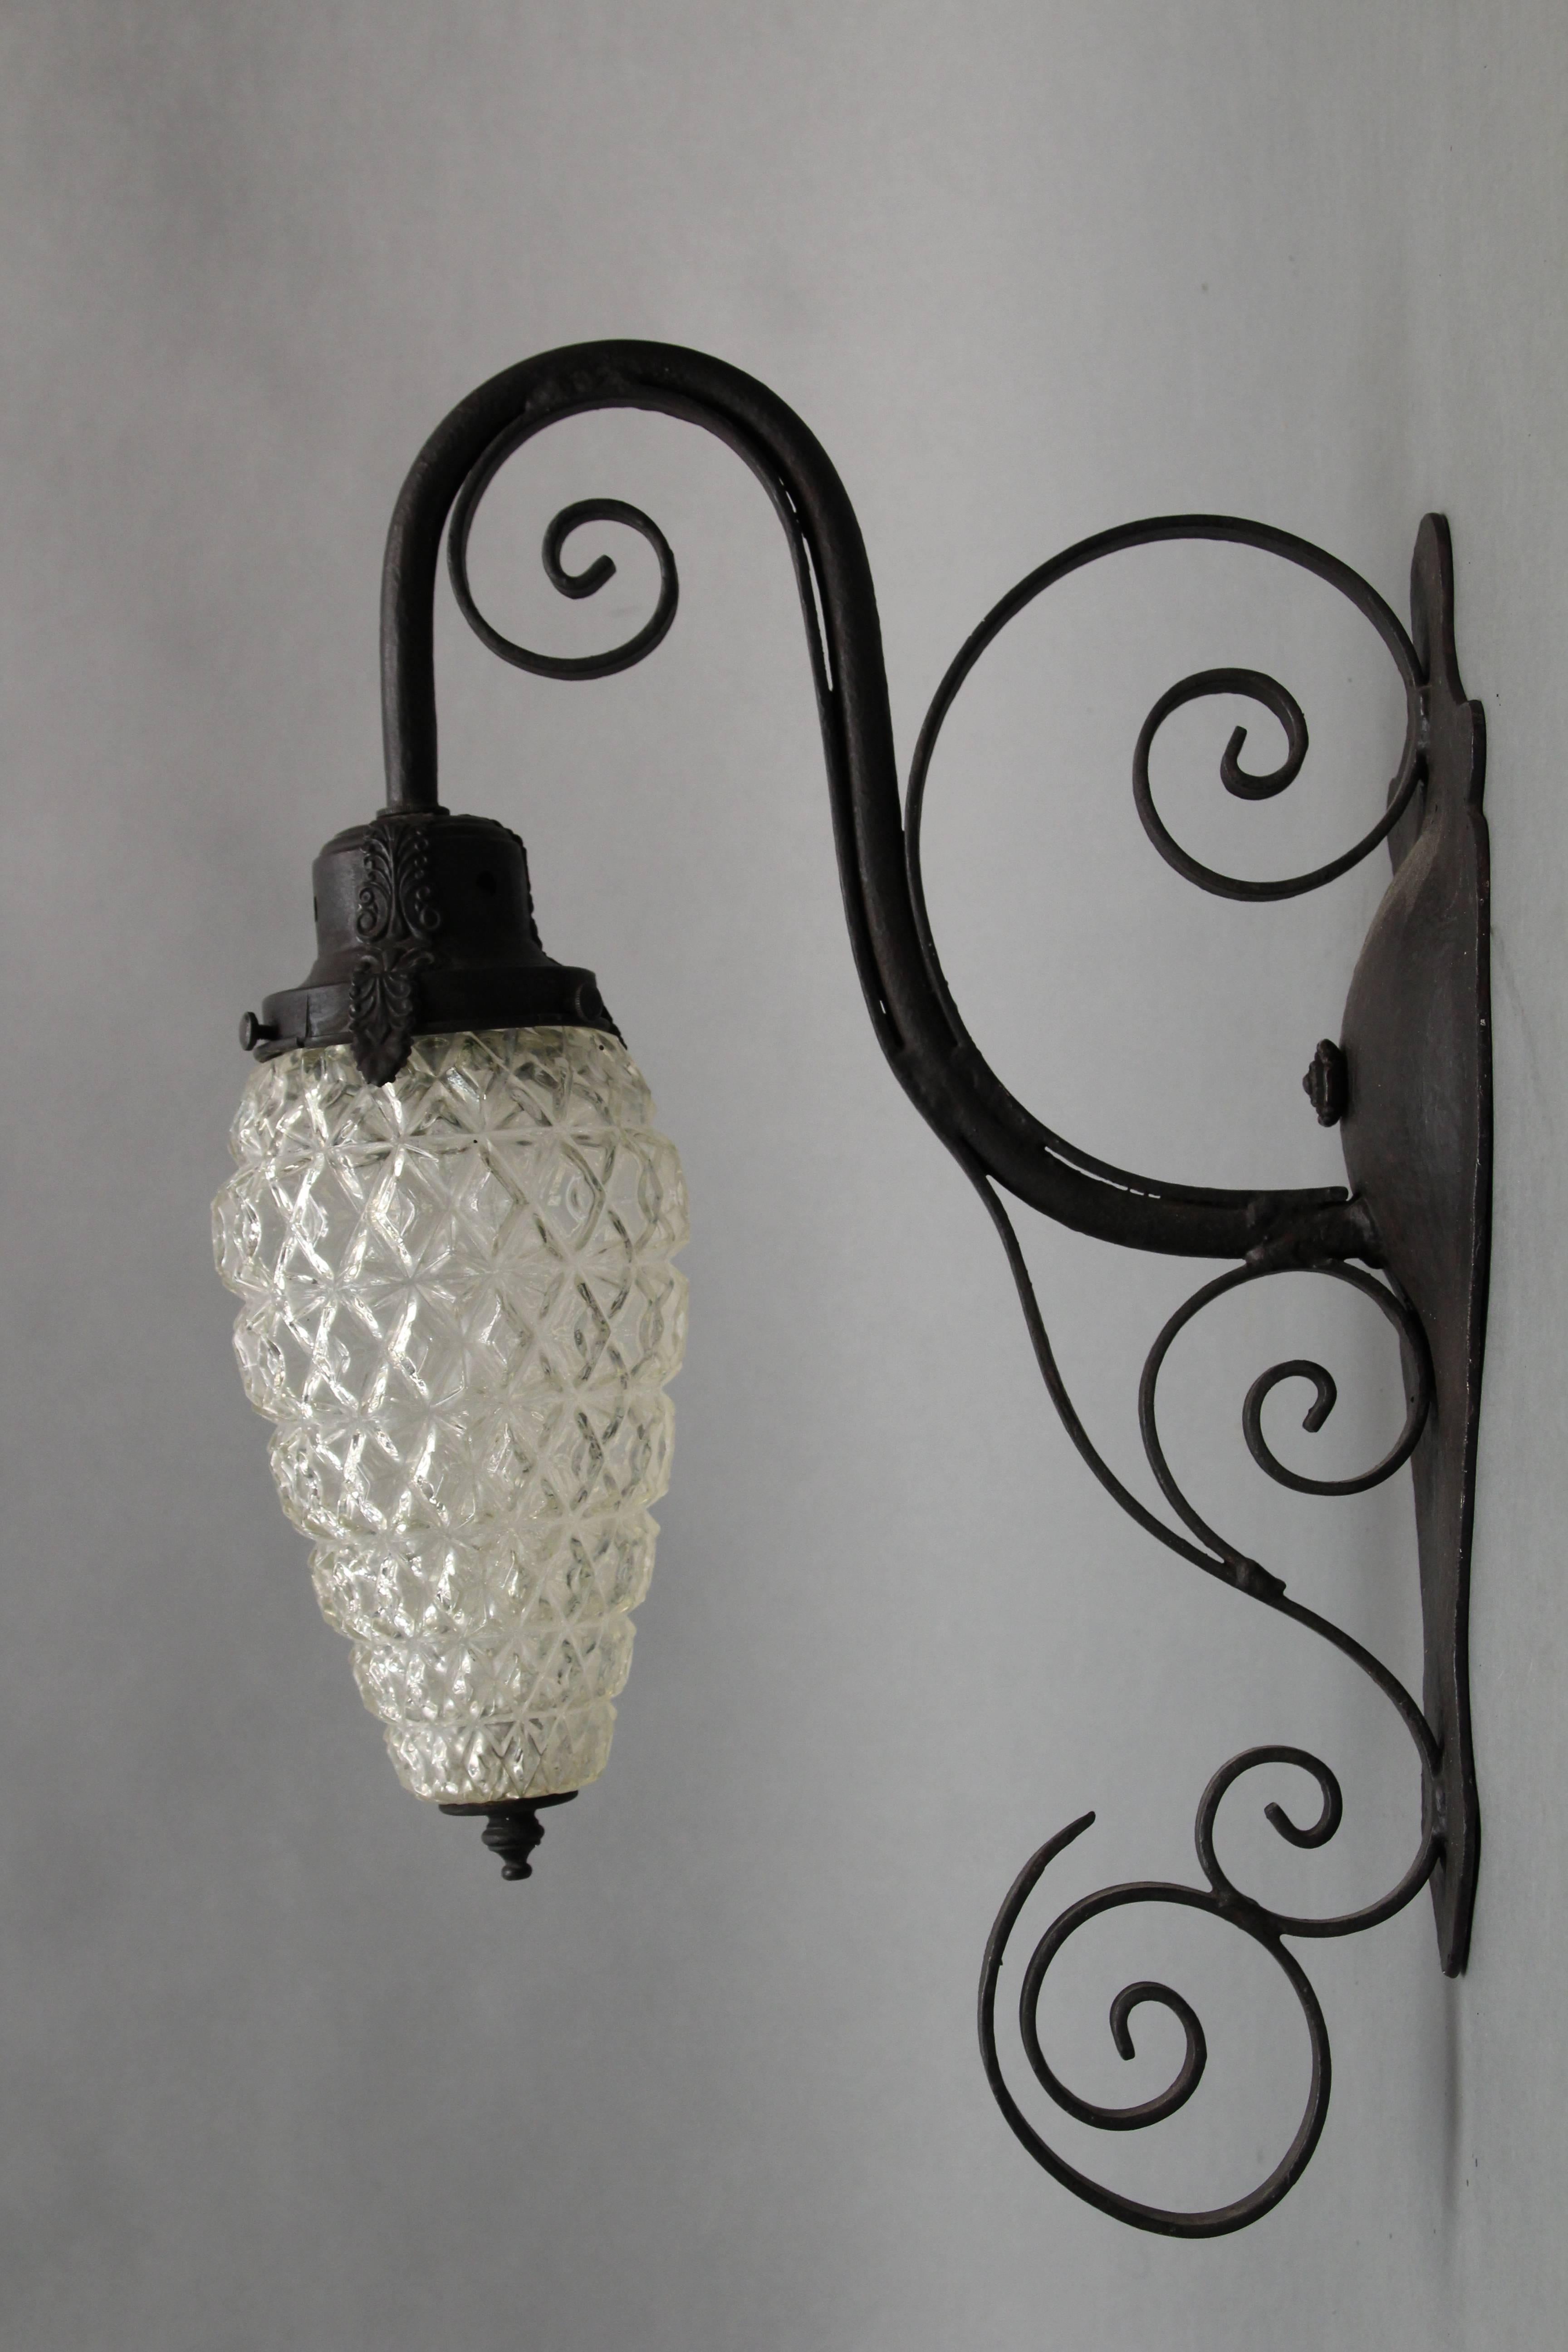 Elegant 1920s iron and glass light fixture with iron scrolls.